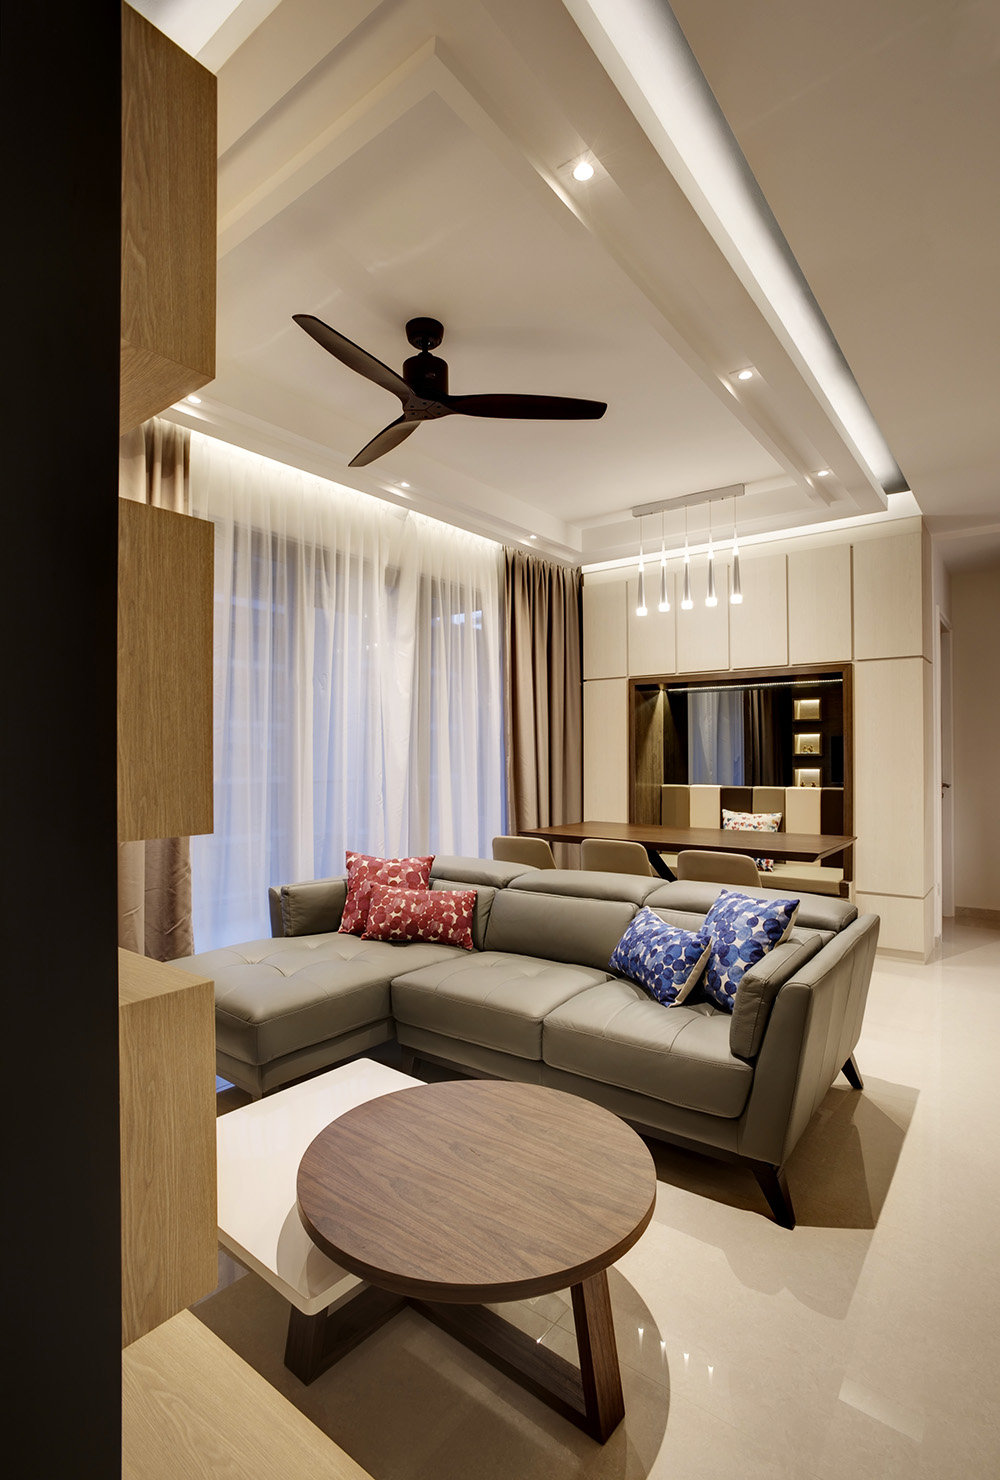 Home Renovation Companies In Singapore